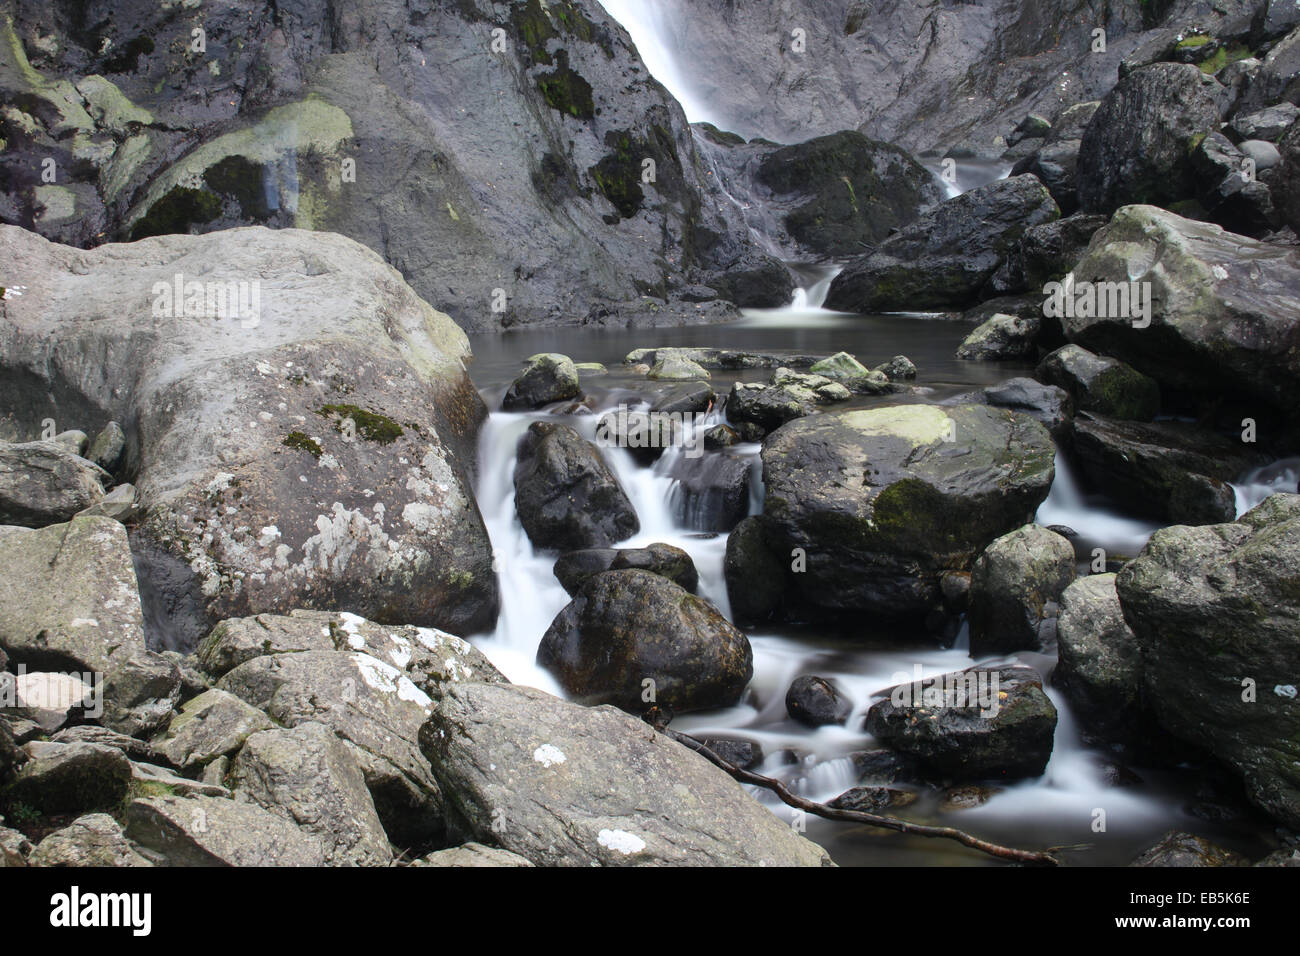 water flowing over rocks Stock Photo